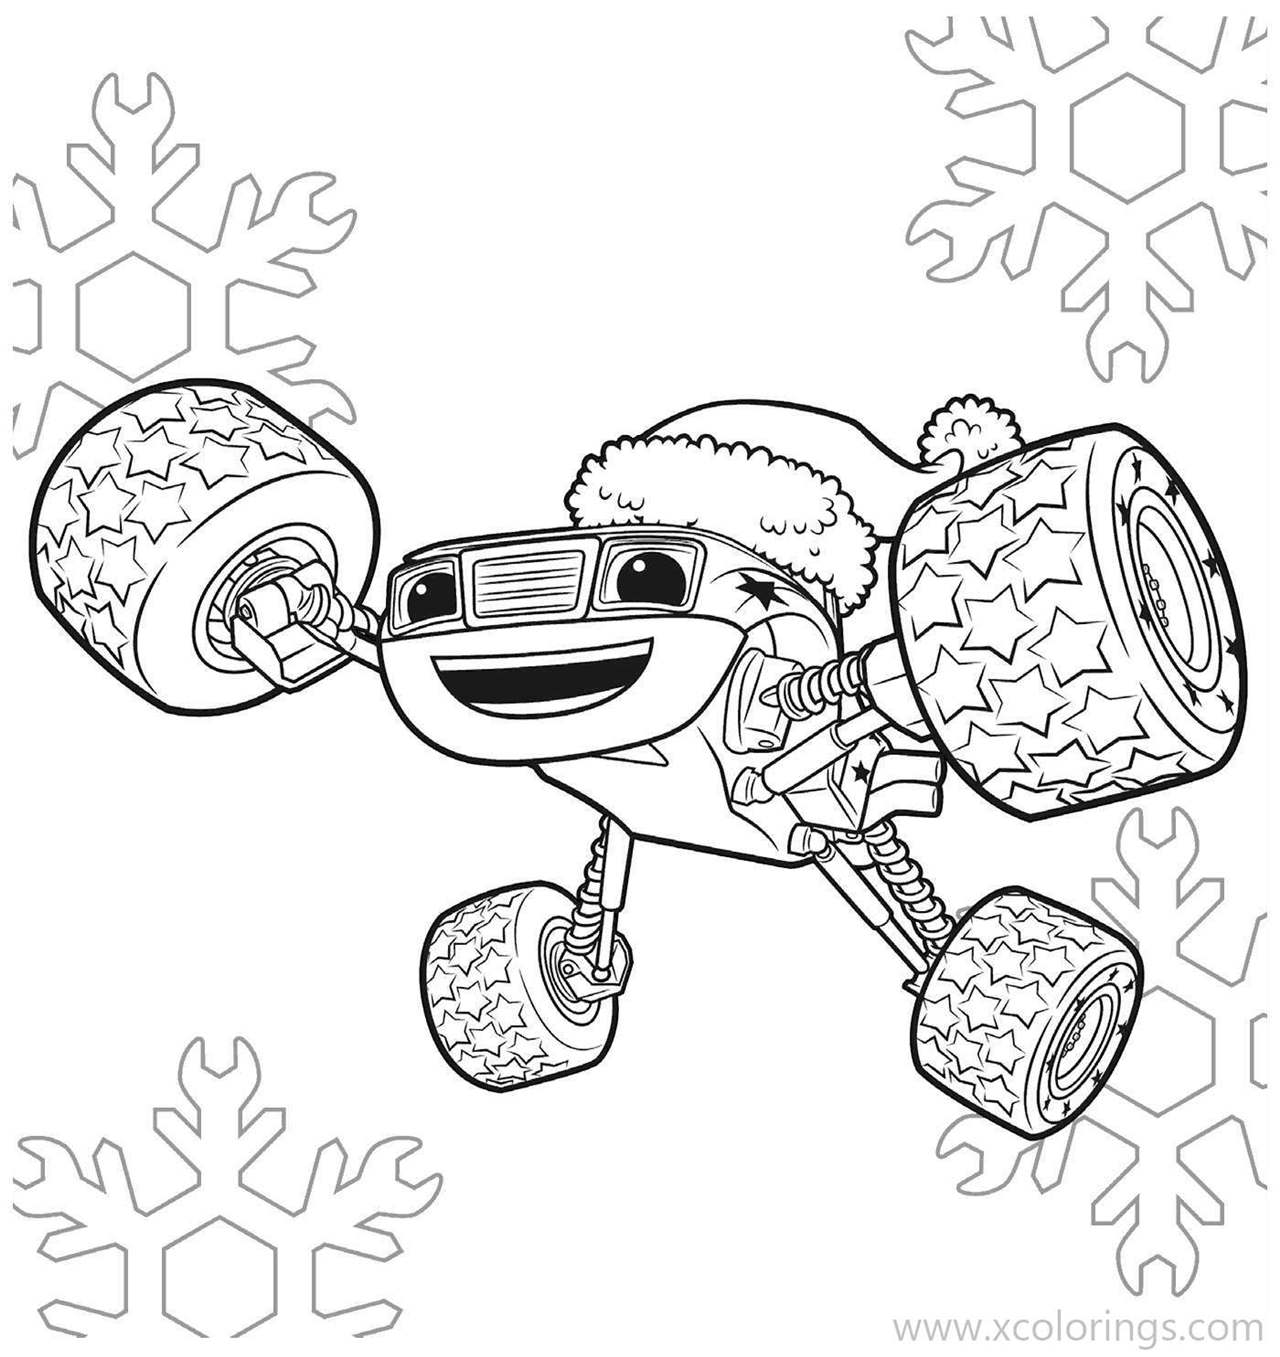 Free Blaze and the Monster Machines with Christmas Hat Coloring Pages printable